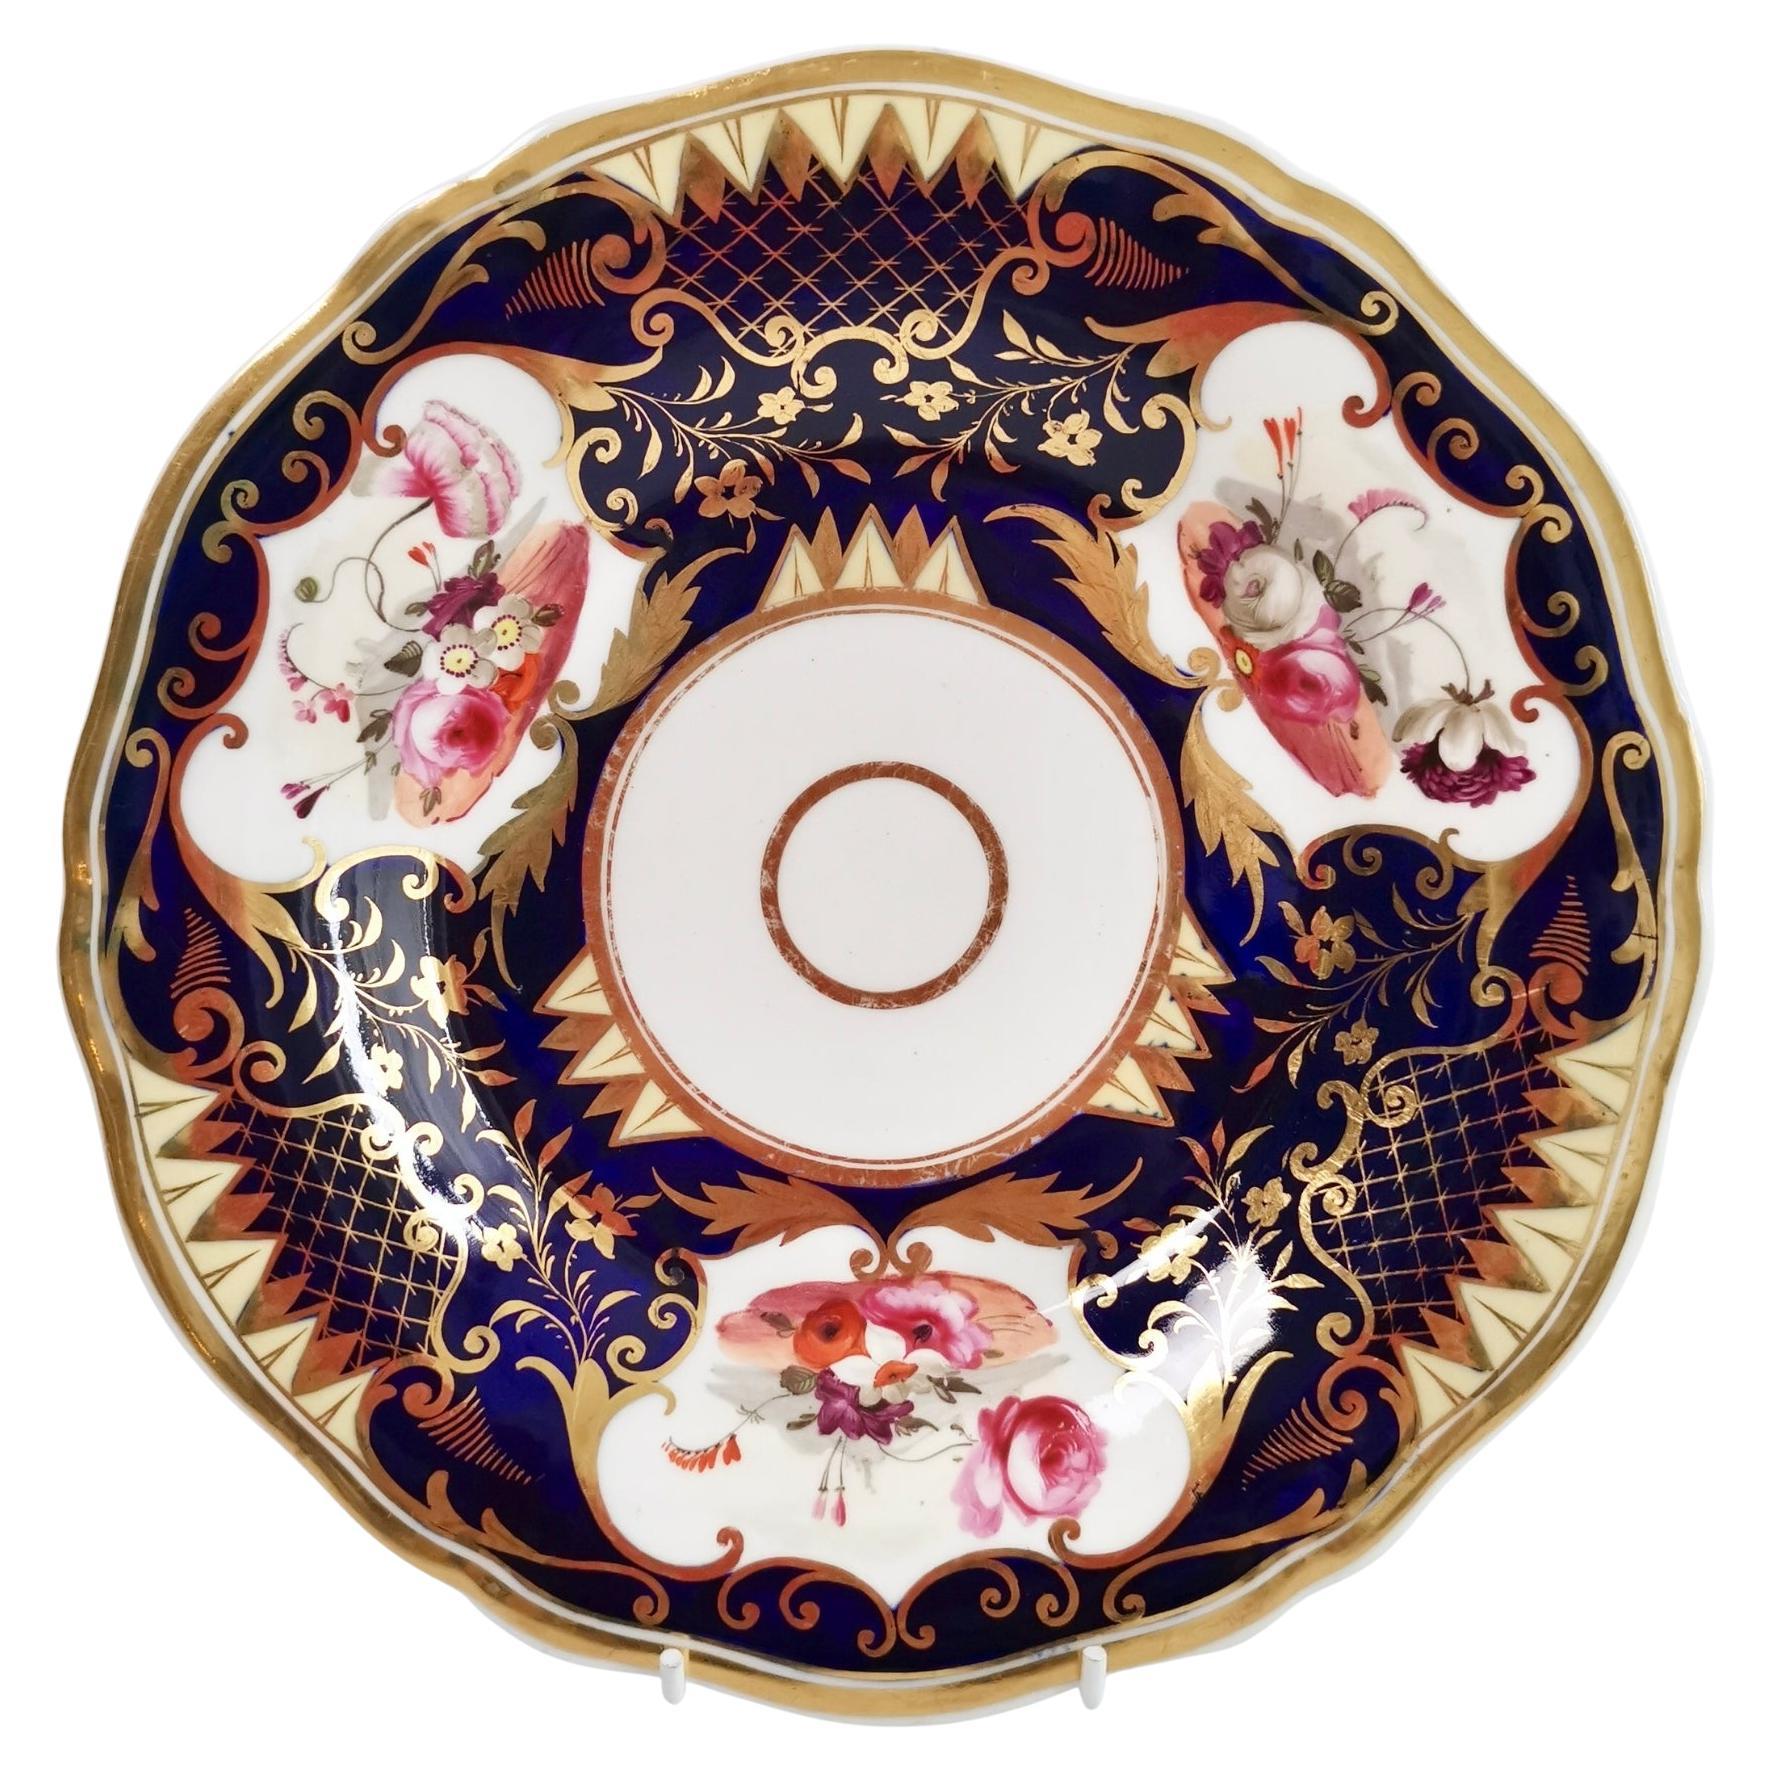 Porcelain Plate Yates, Cobalt Blue with Gilt and Flowers, Regency ca 1826